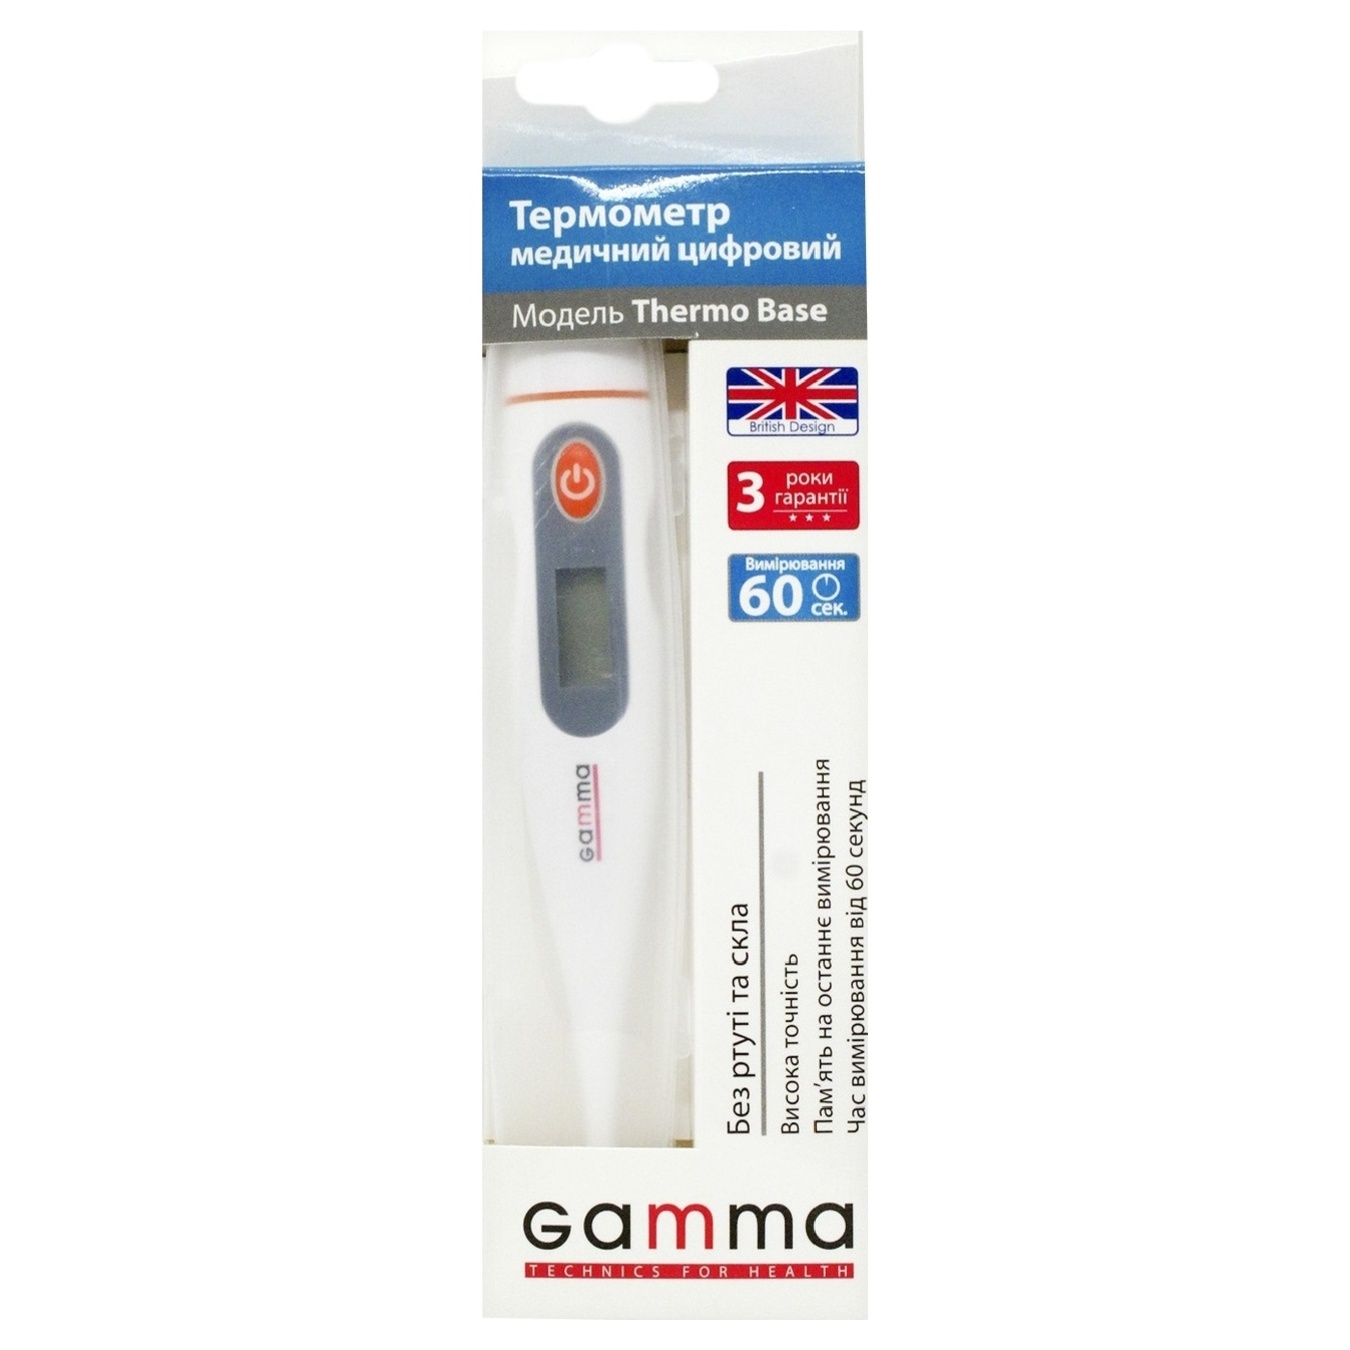 Gamma Thermo Base thermometer